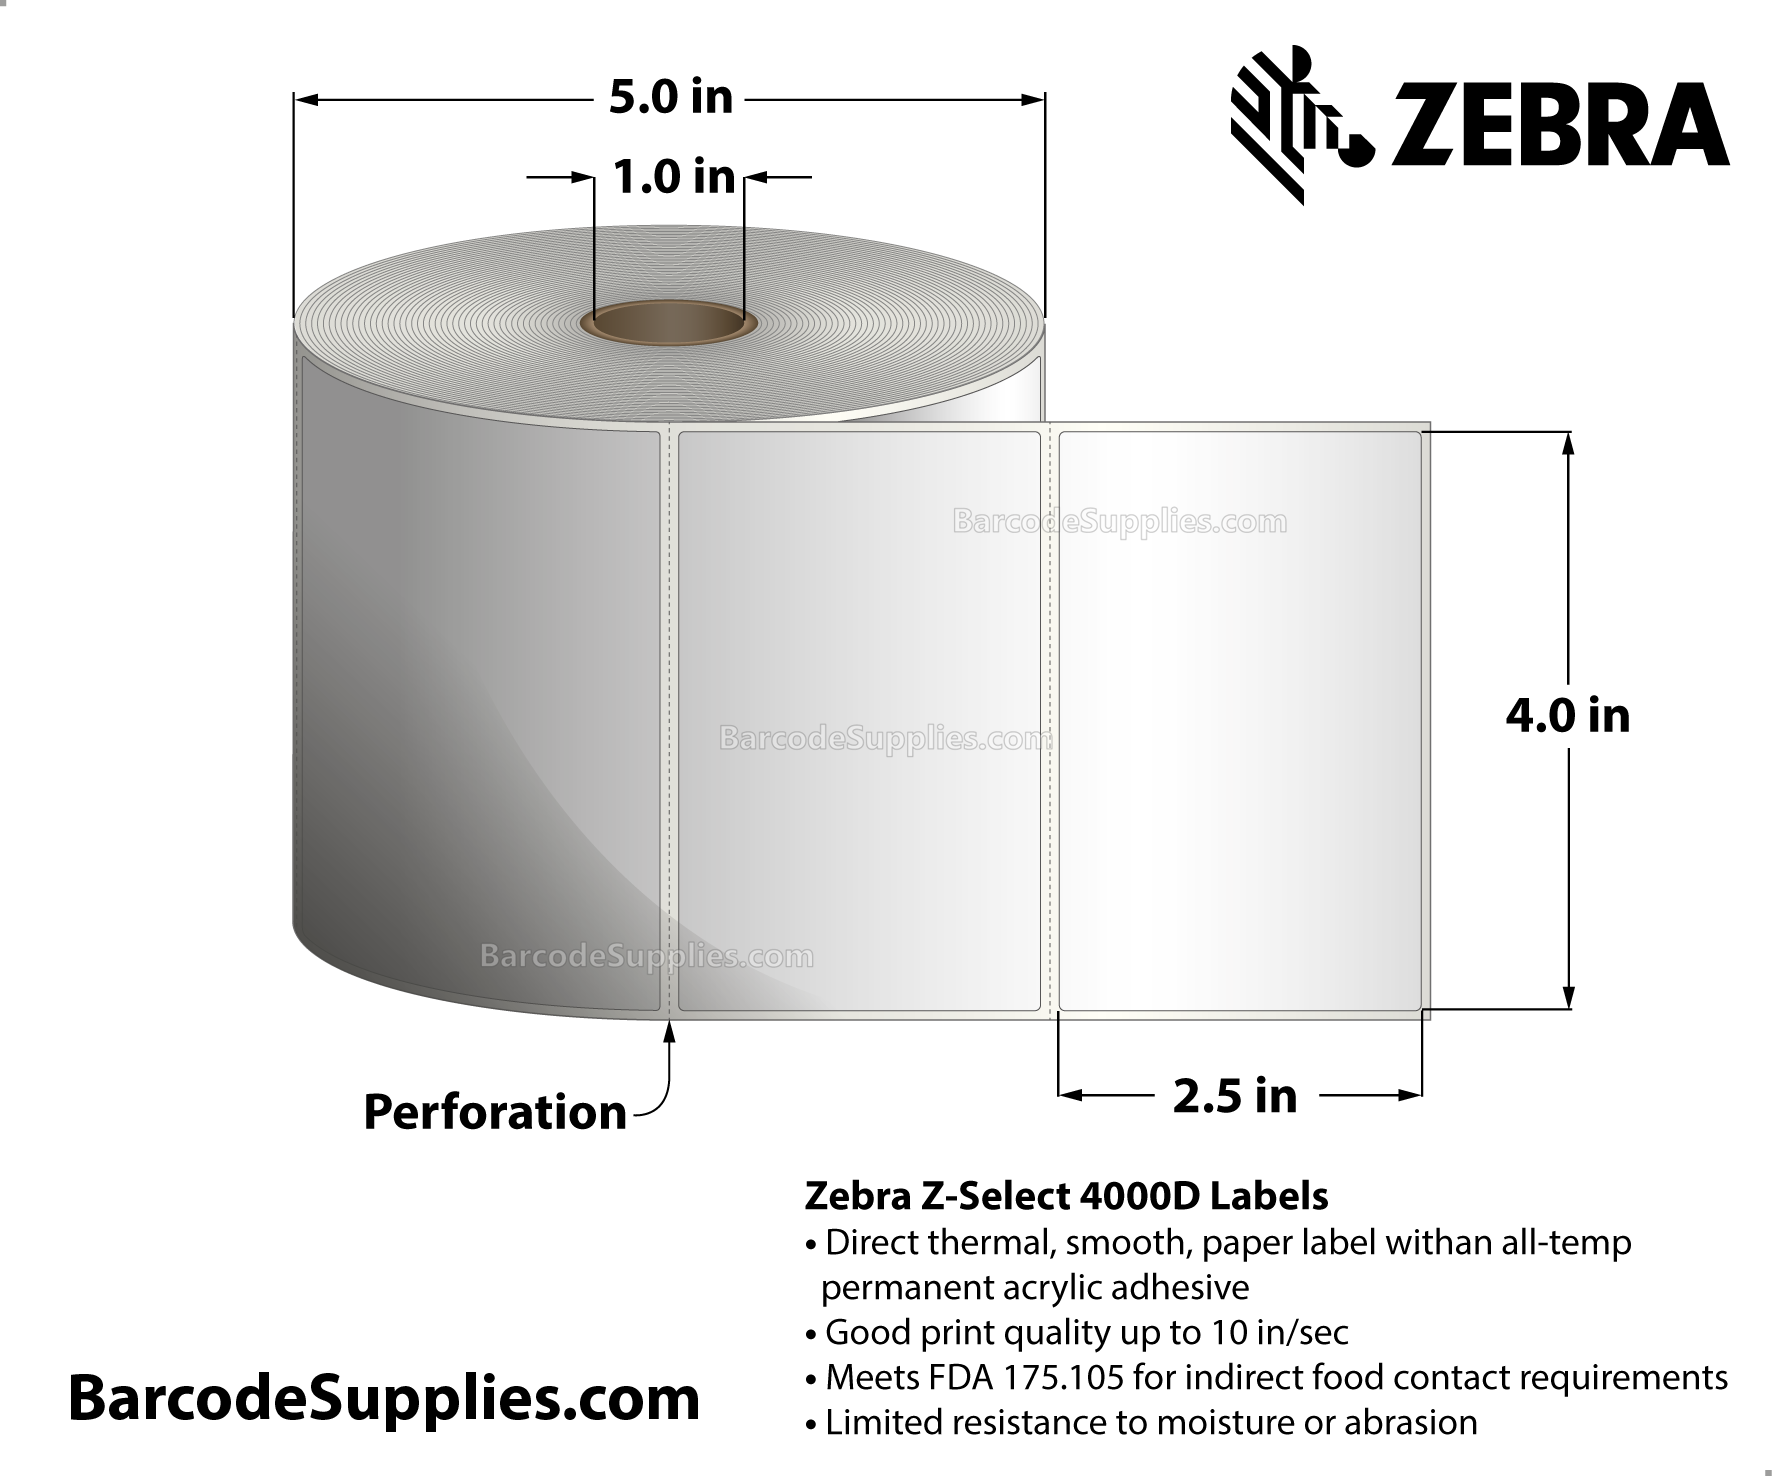 4 x 2.5 Direct Thermal White Z-Select 4000D Labels With All-Temp Adhesive - Perforated - 1000 Labels Per Roll - Carton Of 6 Rolls - 6000 Labels Total - MPN: 10010048